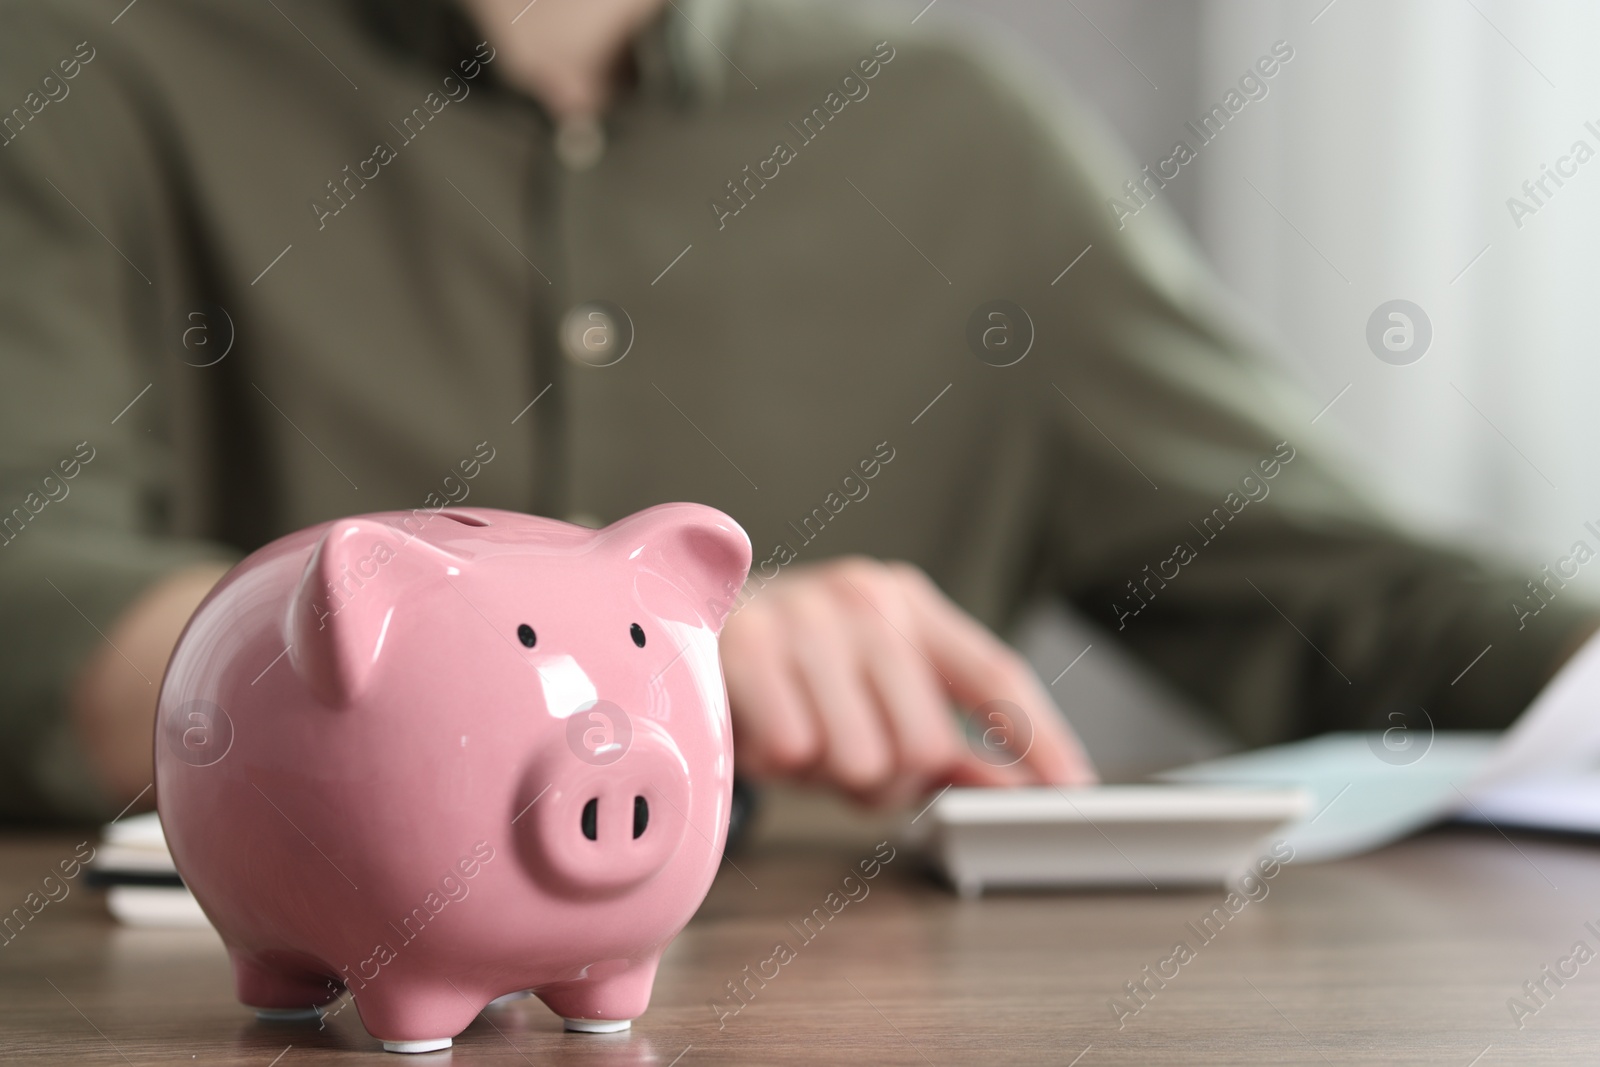 Photo of Financial savings. Man using calculator at wooden table, focus on piggy bank